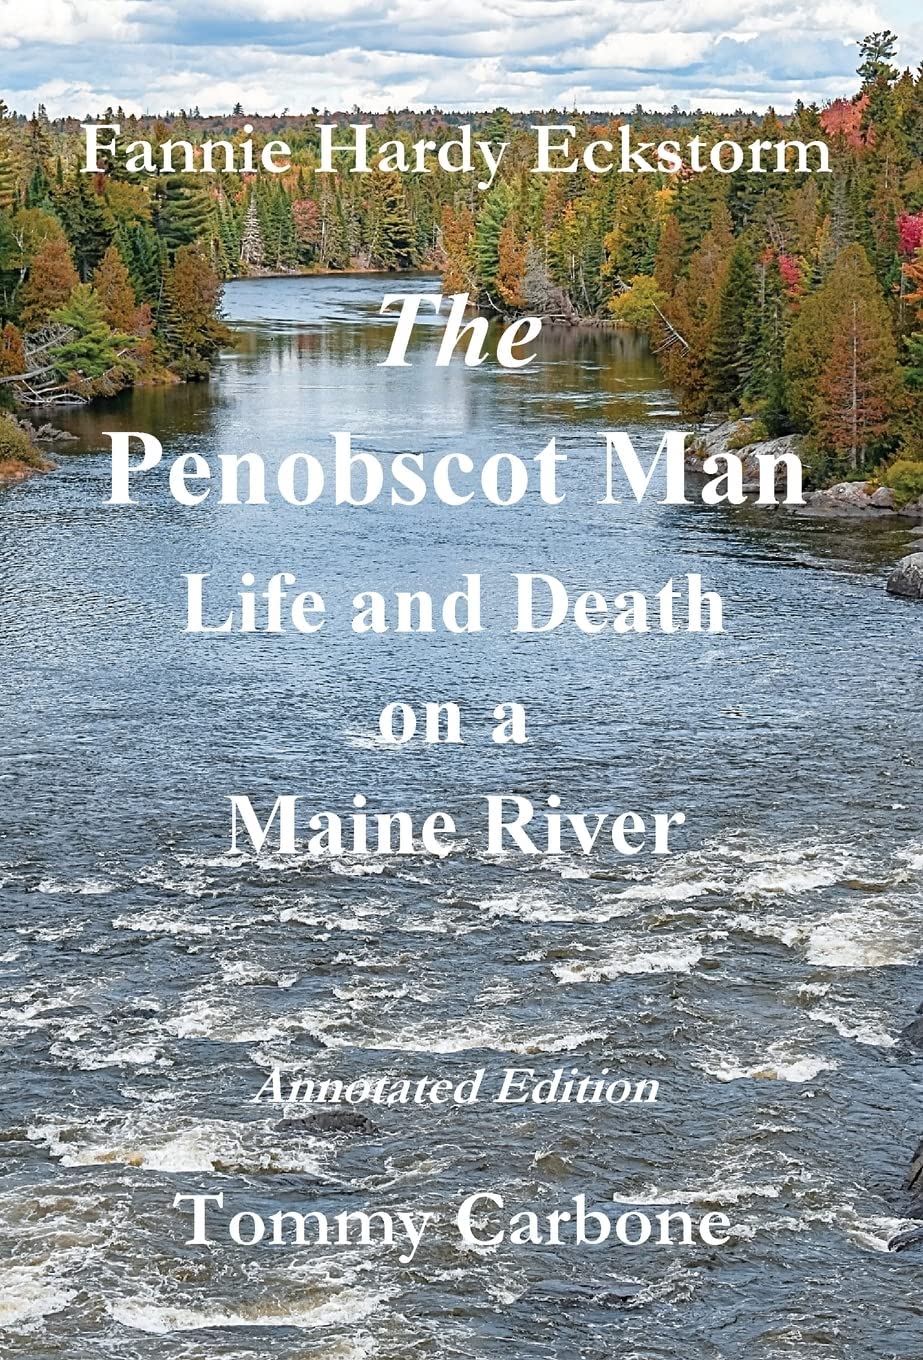 The Penobscot Man – Life and Death on a Maine River